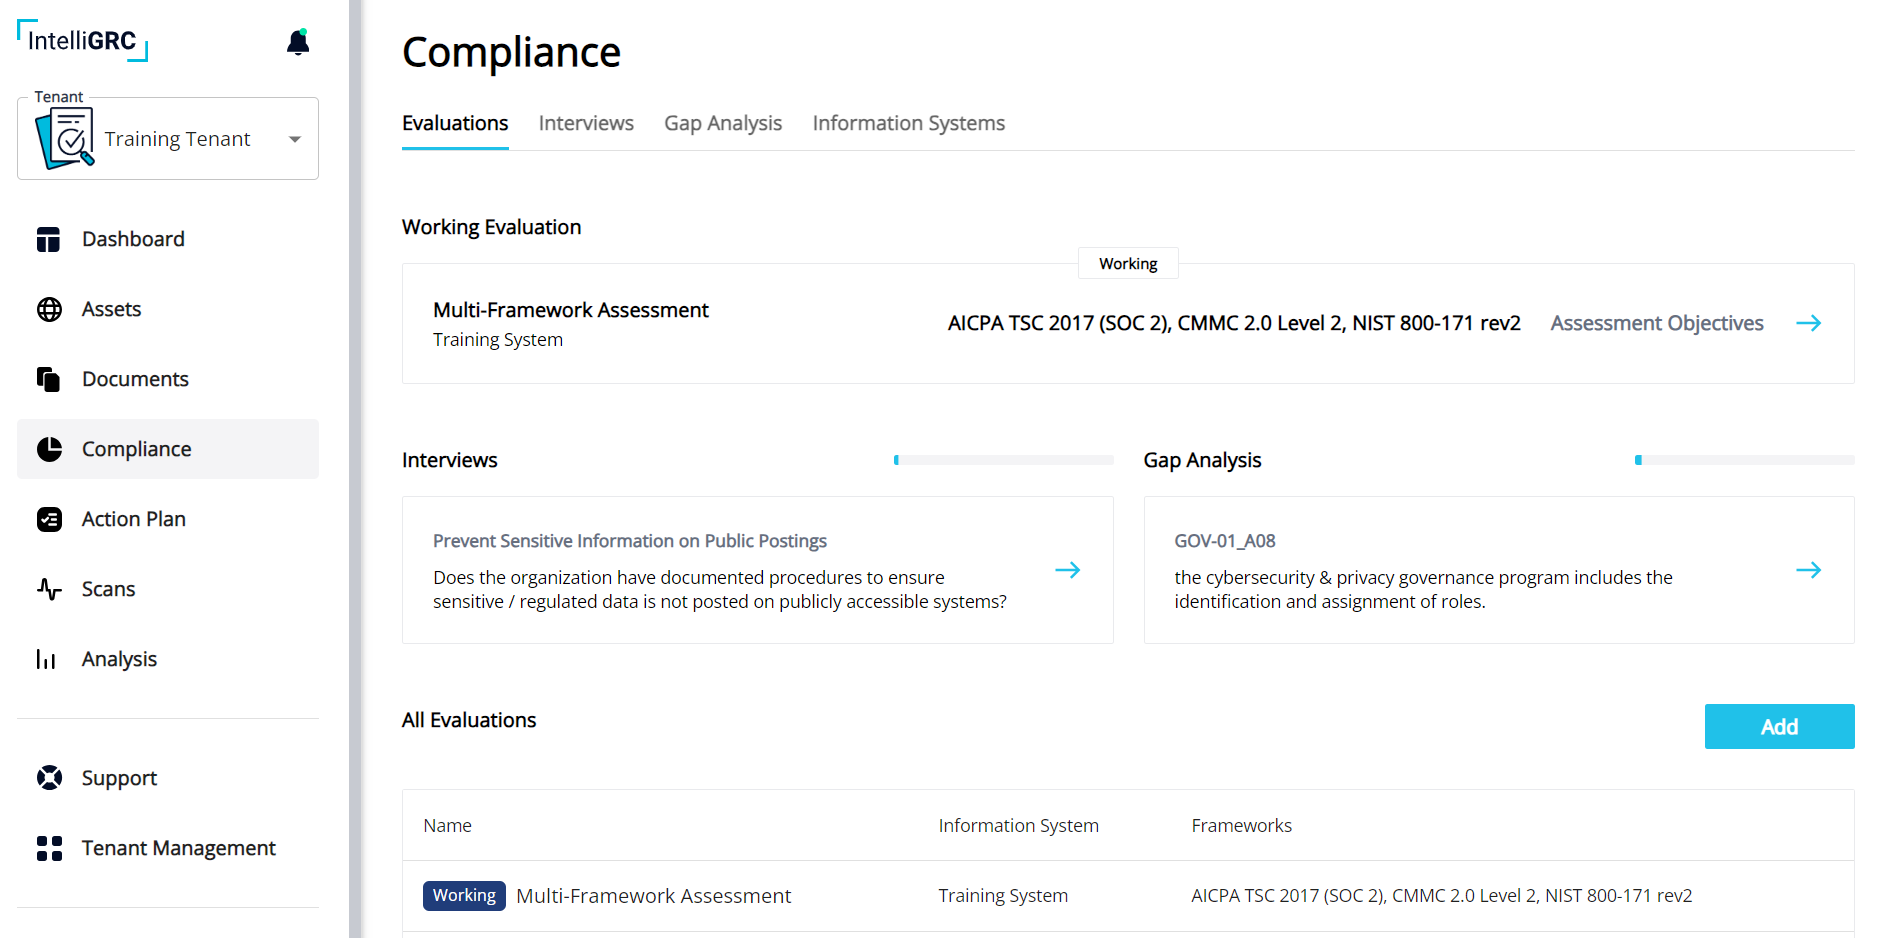 Compliance workspace for interviews, gap analysis, and scoping information system boundaries.